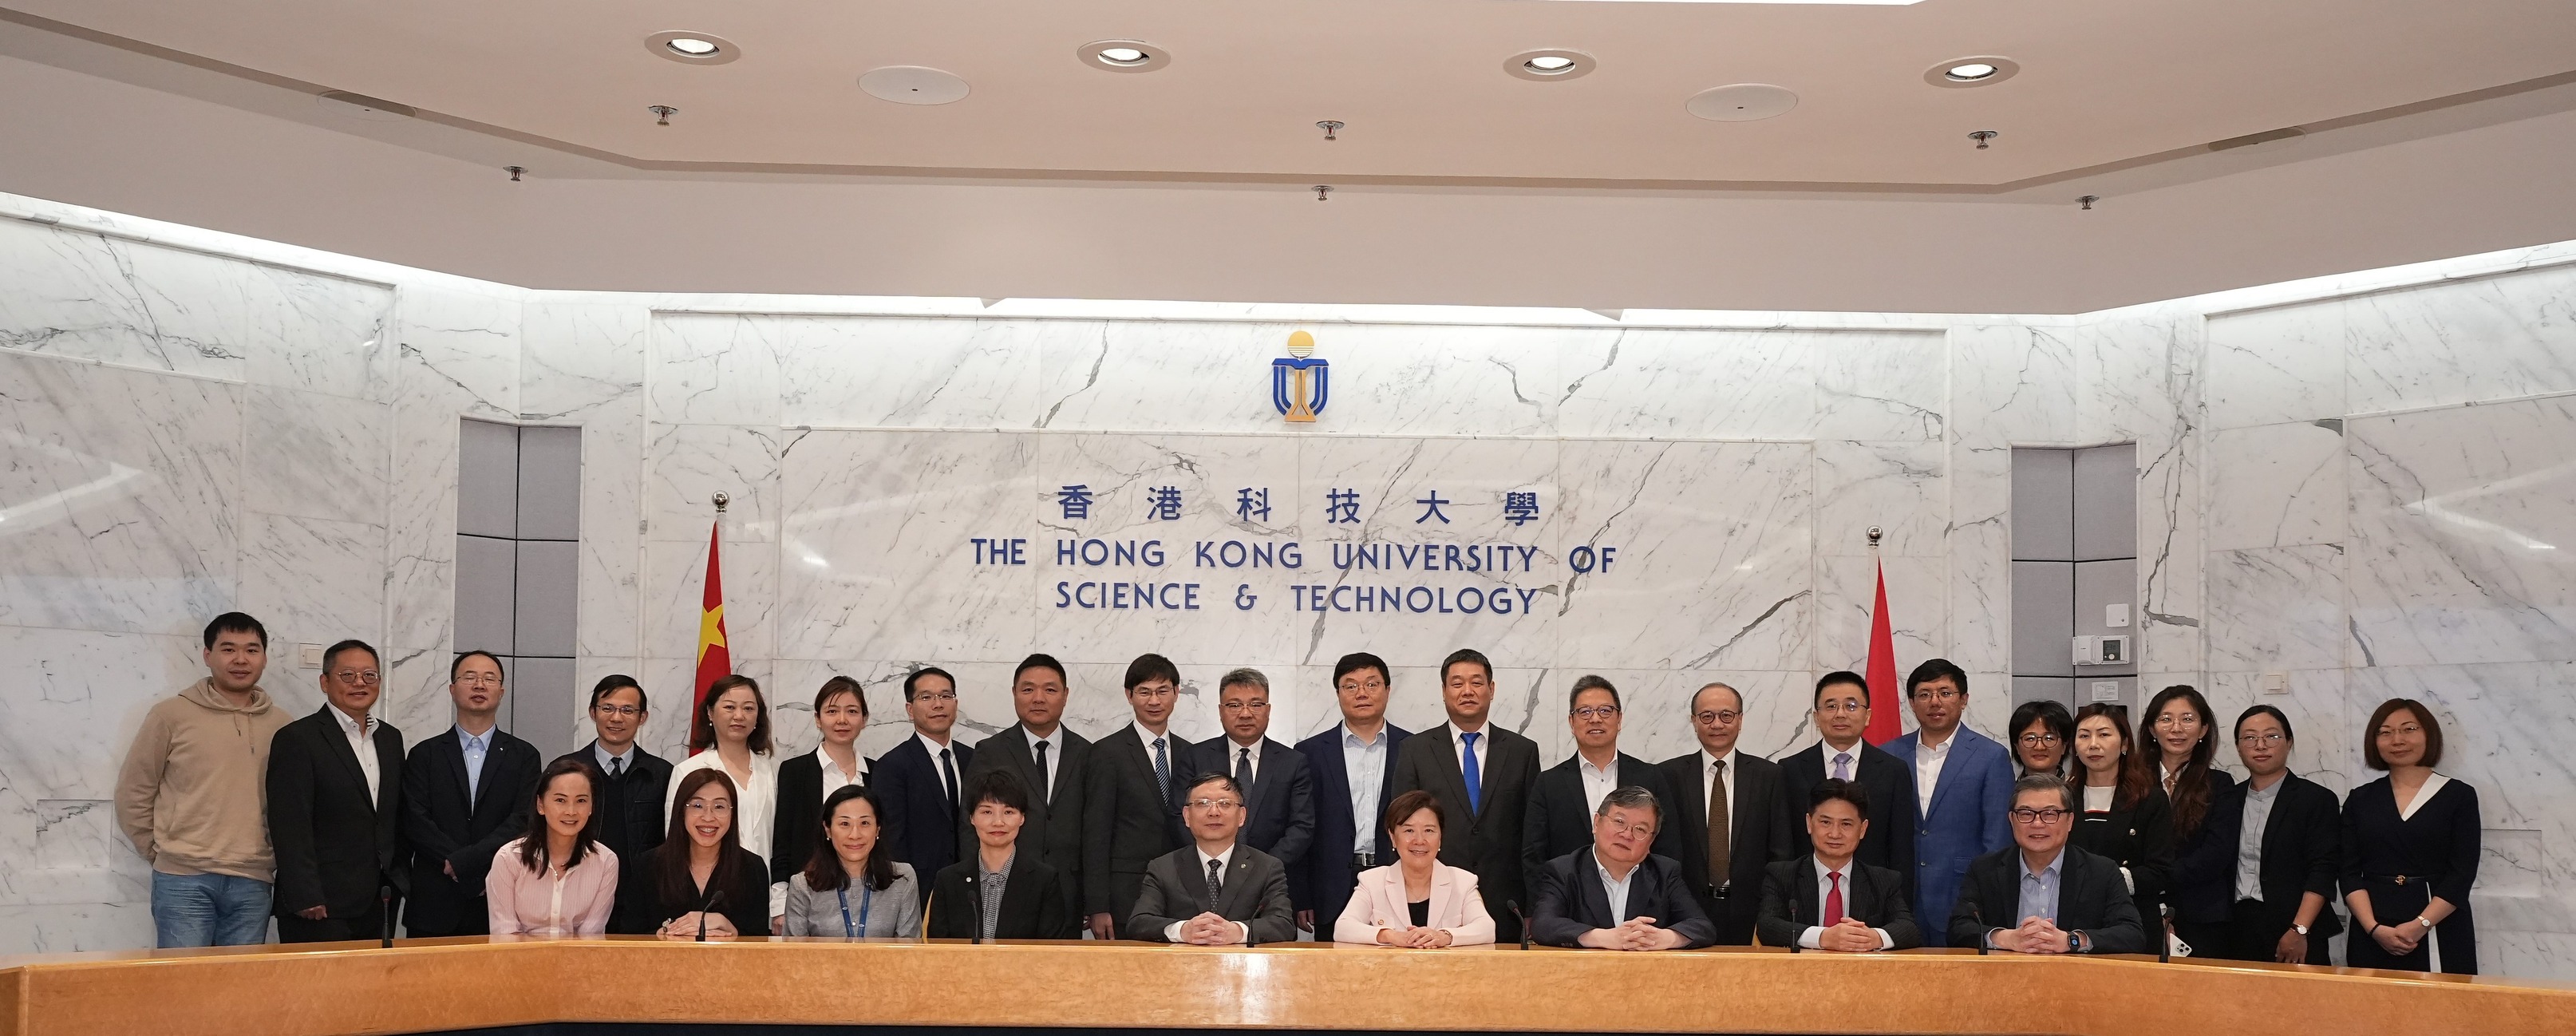 HKUST president Prof. Nancy IP (forth right, first row), Provost Prof. GUO Yike (third right, first row), Dean of HKUST Fok Ying Tung Graduate School Prof. Charles NG (second right, first row), Dean of Engineering Prof. Hong LO (nineth right, 2nd row), Dean of Business & Management Prof. TAM Kar Yan (first right, first row) and Associate Vice-President (Global Engagement & Communications) Ms. Daisy CHAN (forth right, second row) had productive discussions with the Secretary of the CPC Committee of Tongji Un